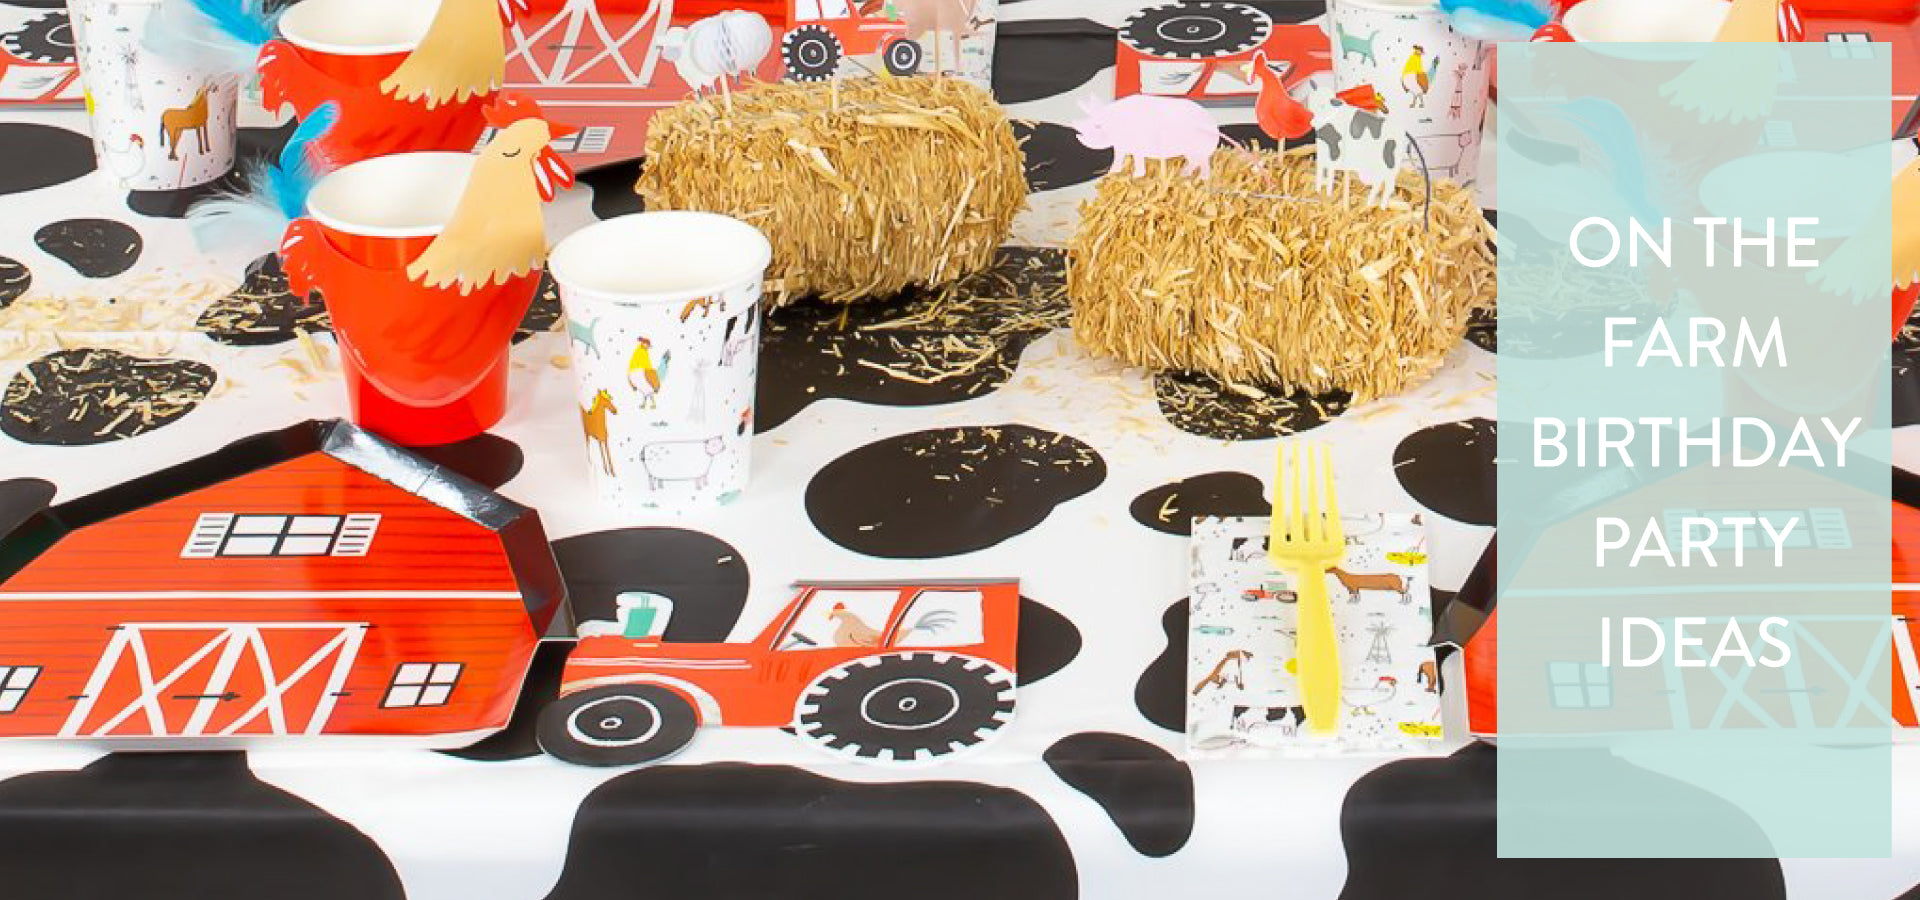 On the Farm Birthday Party Ideas | The Party Darling